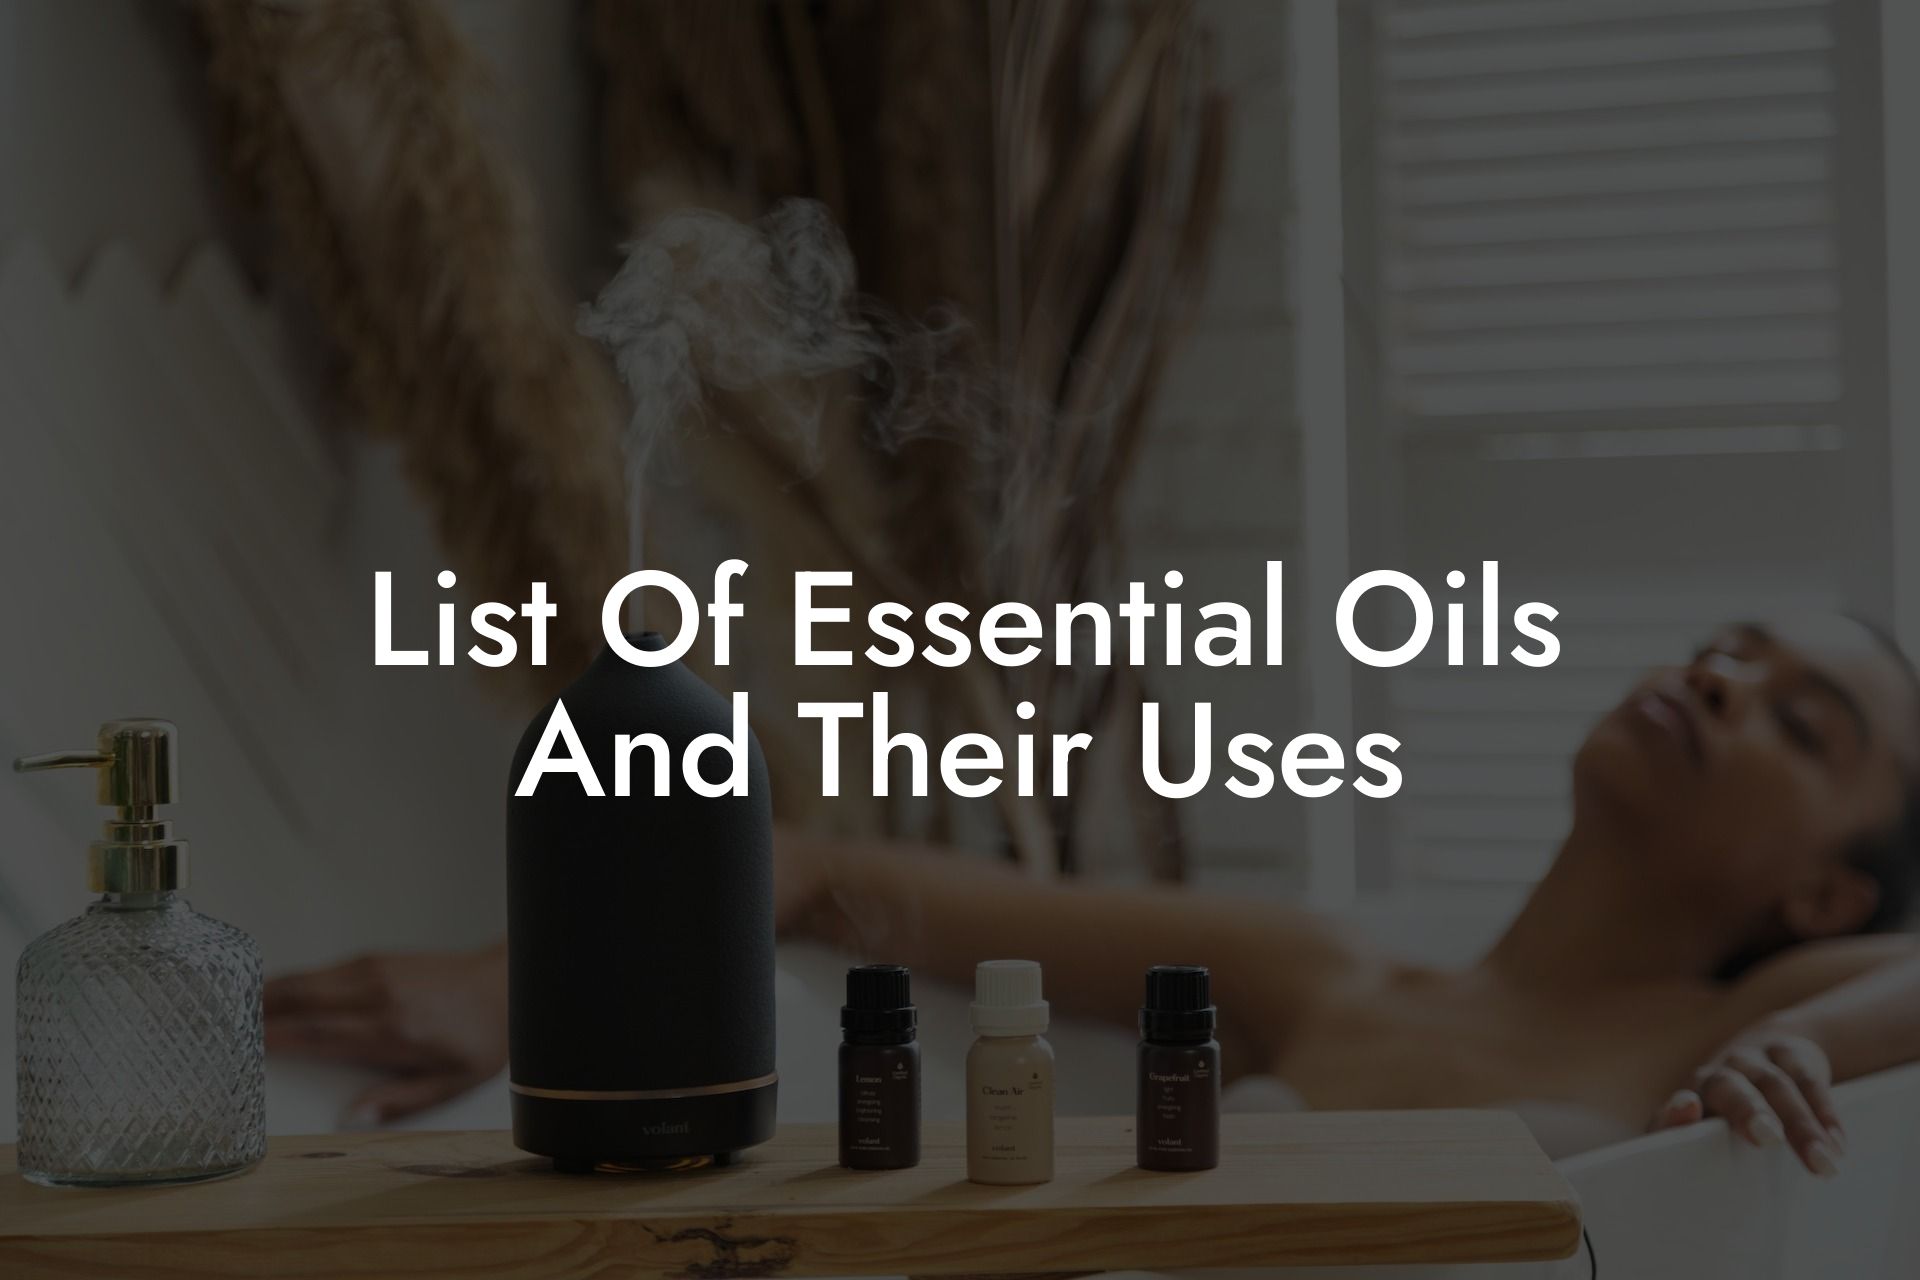 List Of Essential Oils And Their Uses